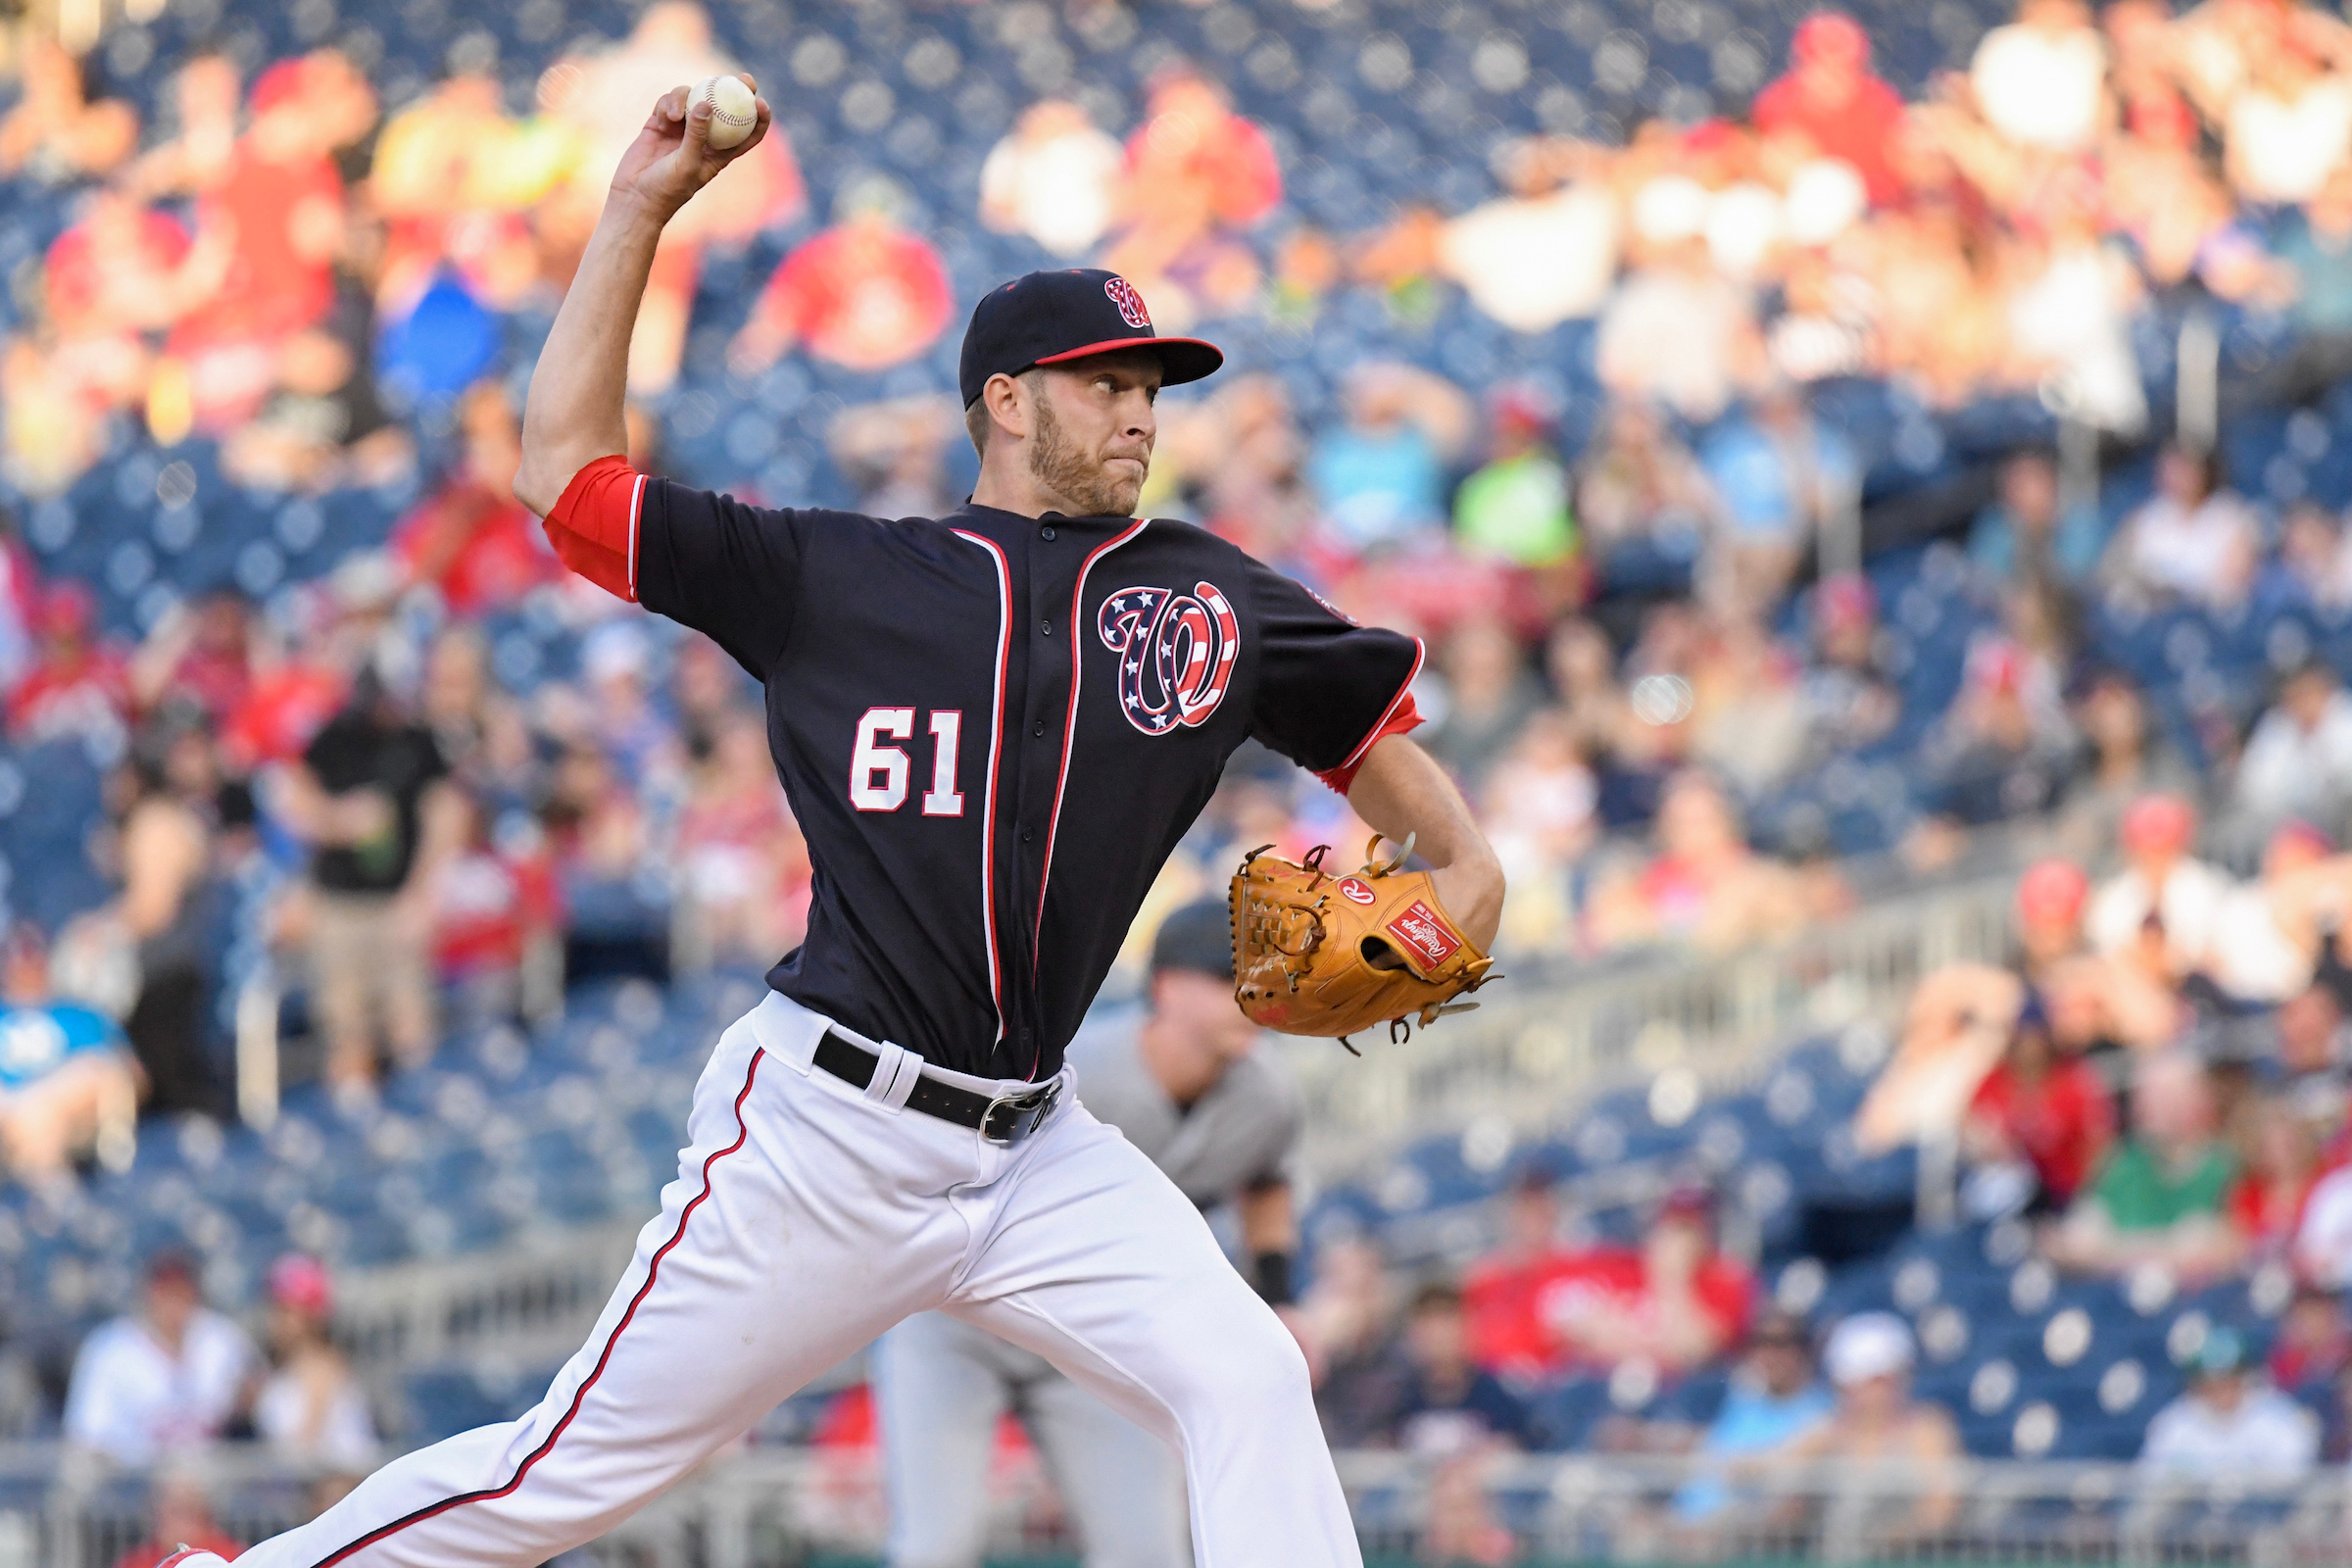 Sag Harbor native Kyle McGowin earned his first major league win with the Washington Nationals.